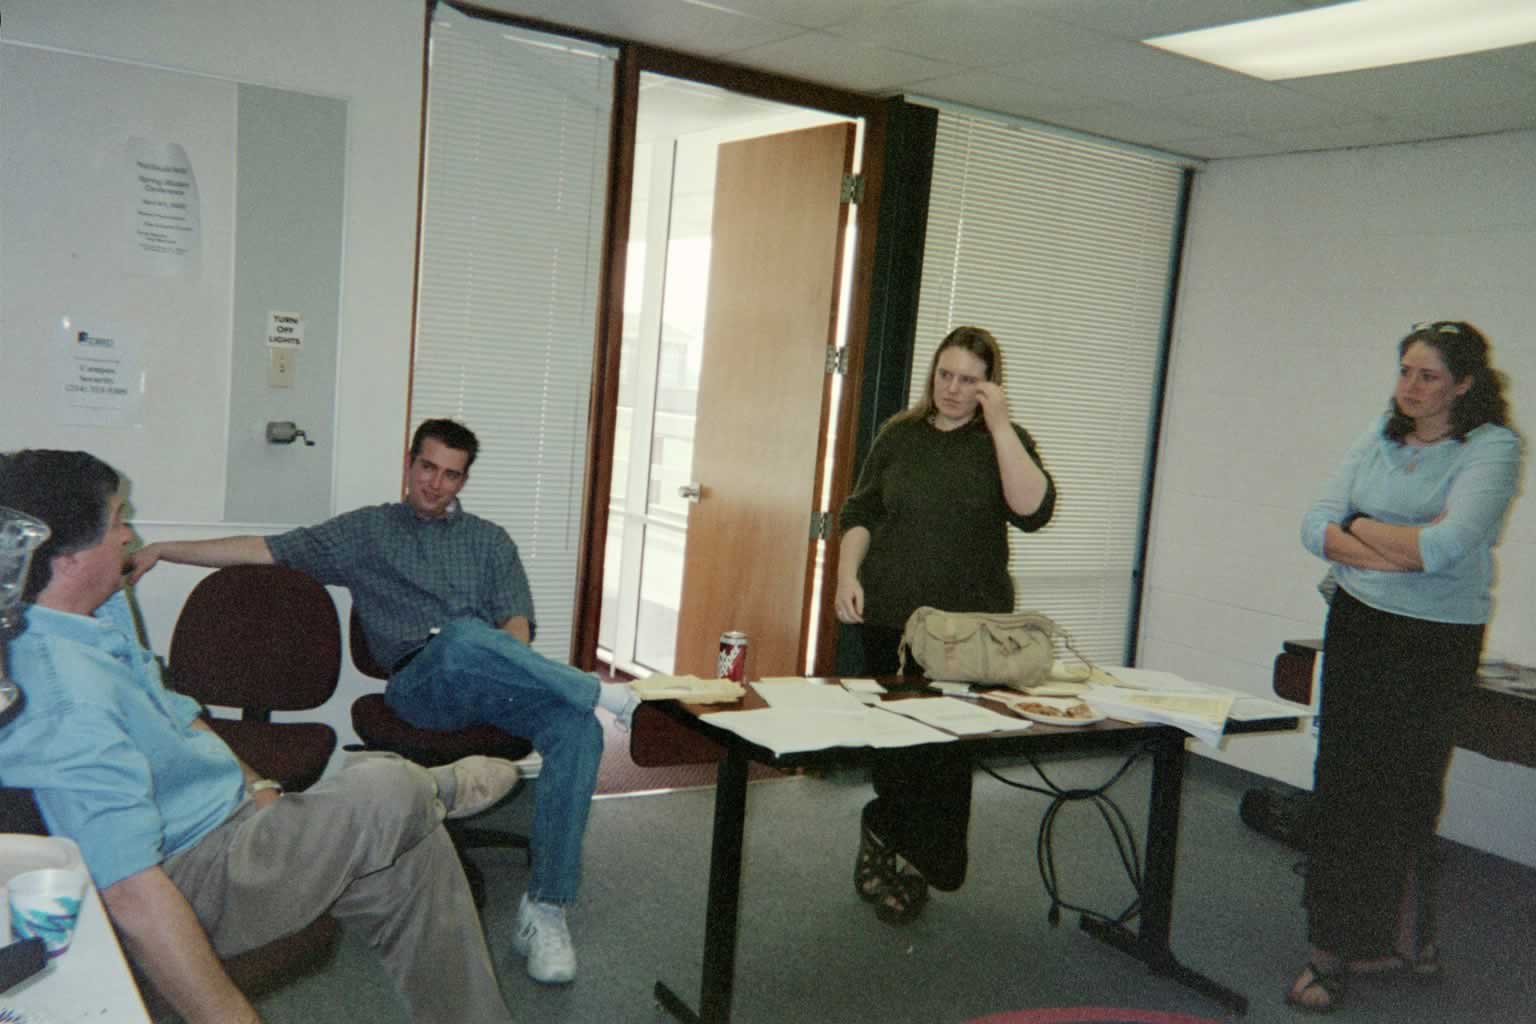 picture of Paul Marshall sitting and speaking while others are standing or sitting around him